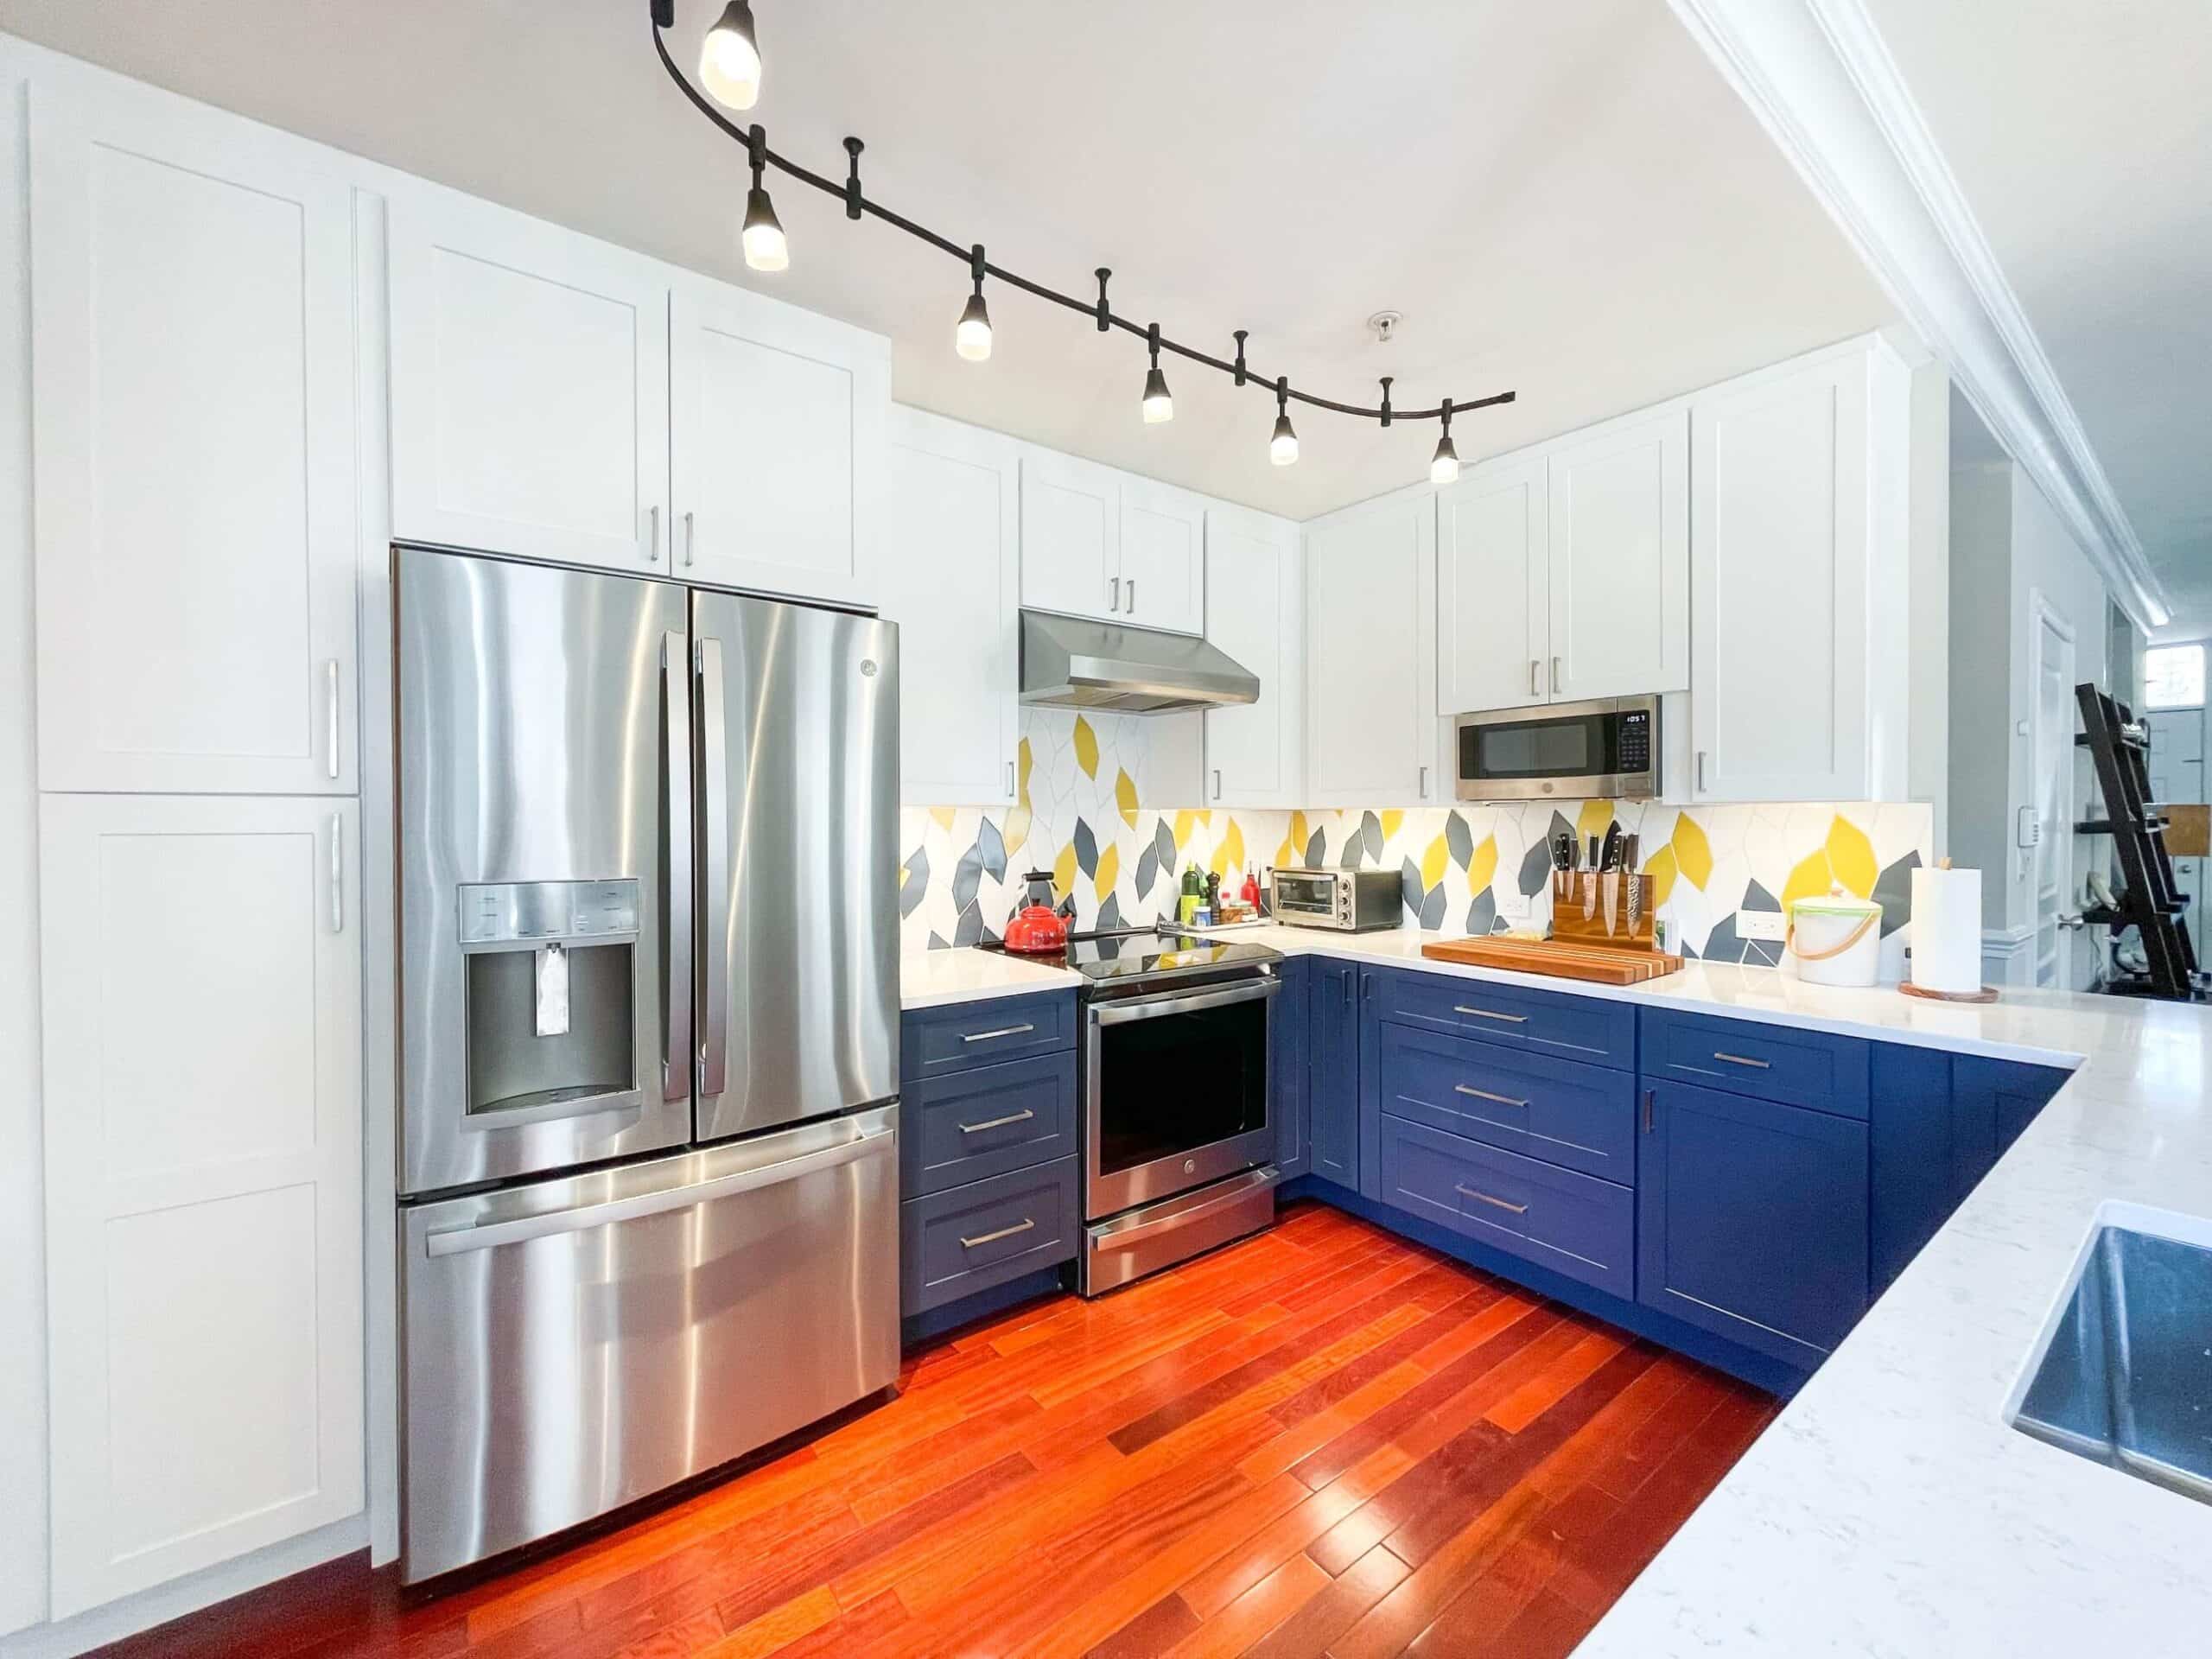 Fancy kitchen design with white and navy blue cabinets, and wood flooring